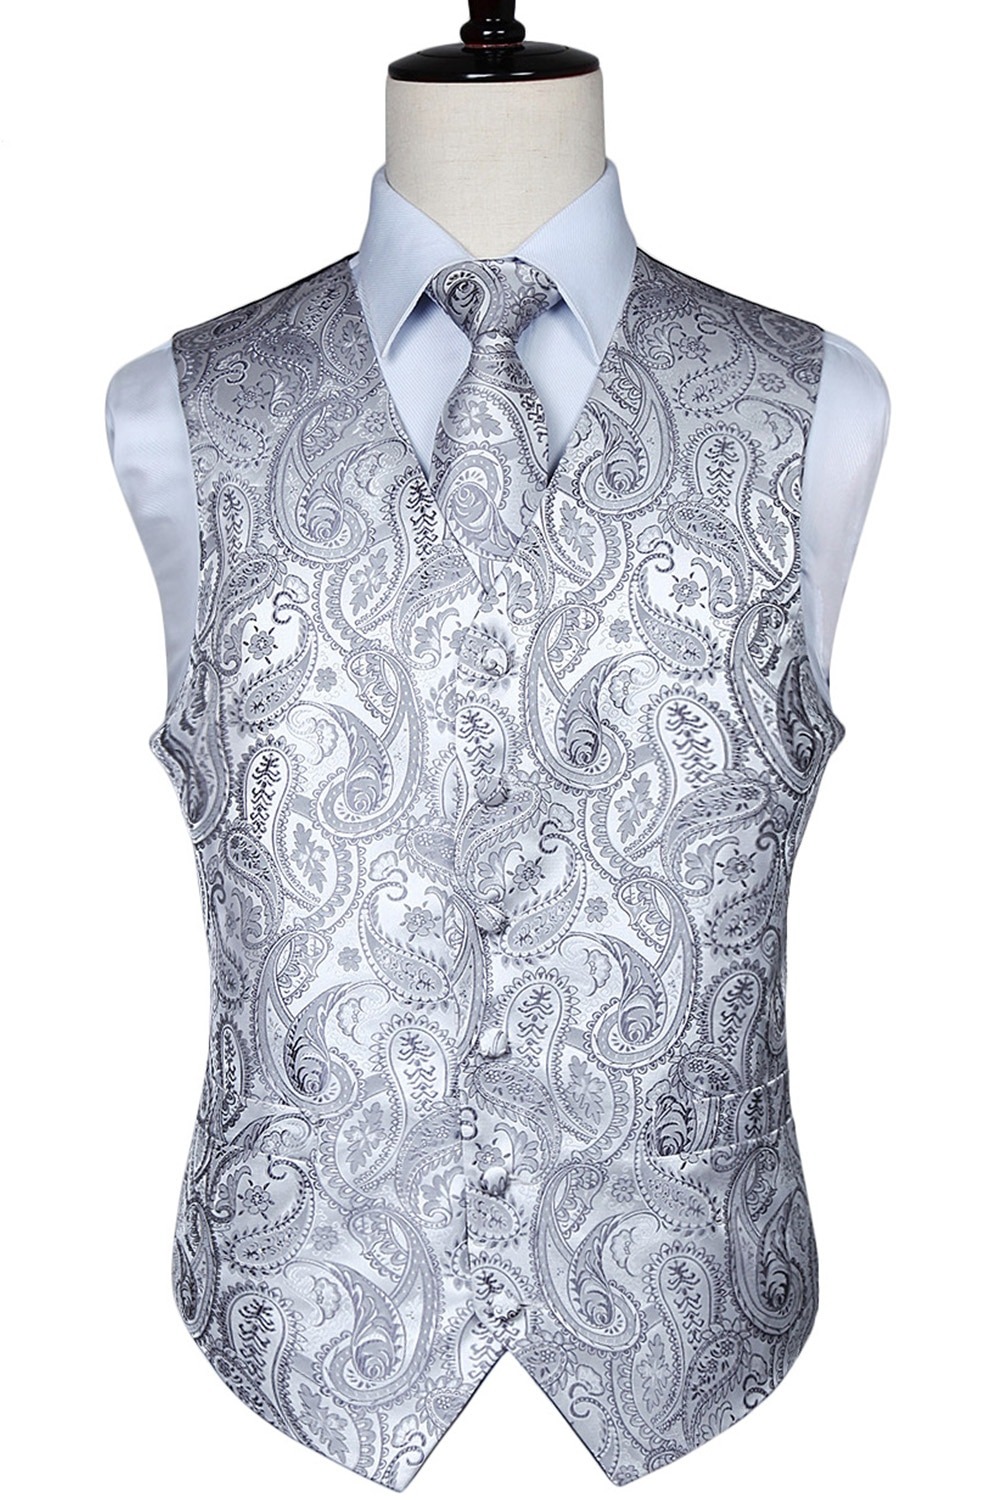 Important Choices For the Perfect Paisley Vest